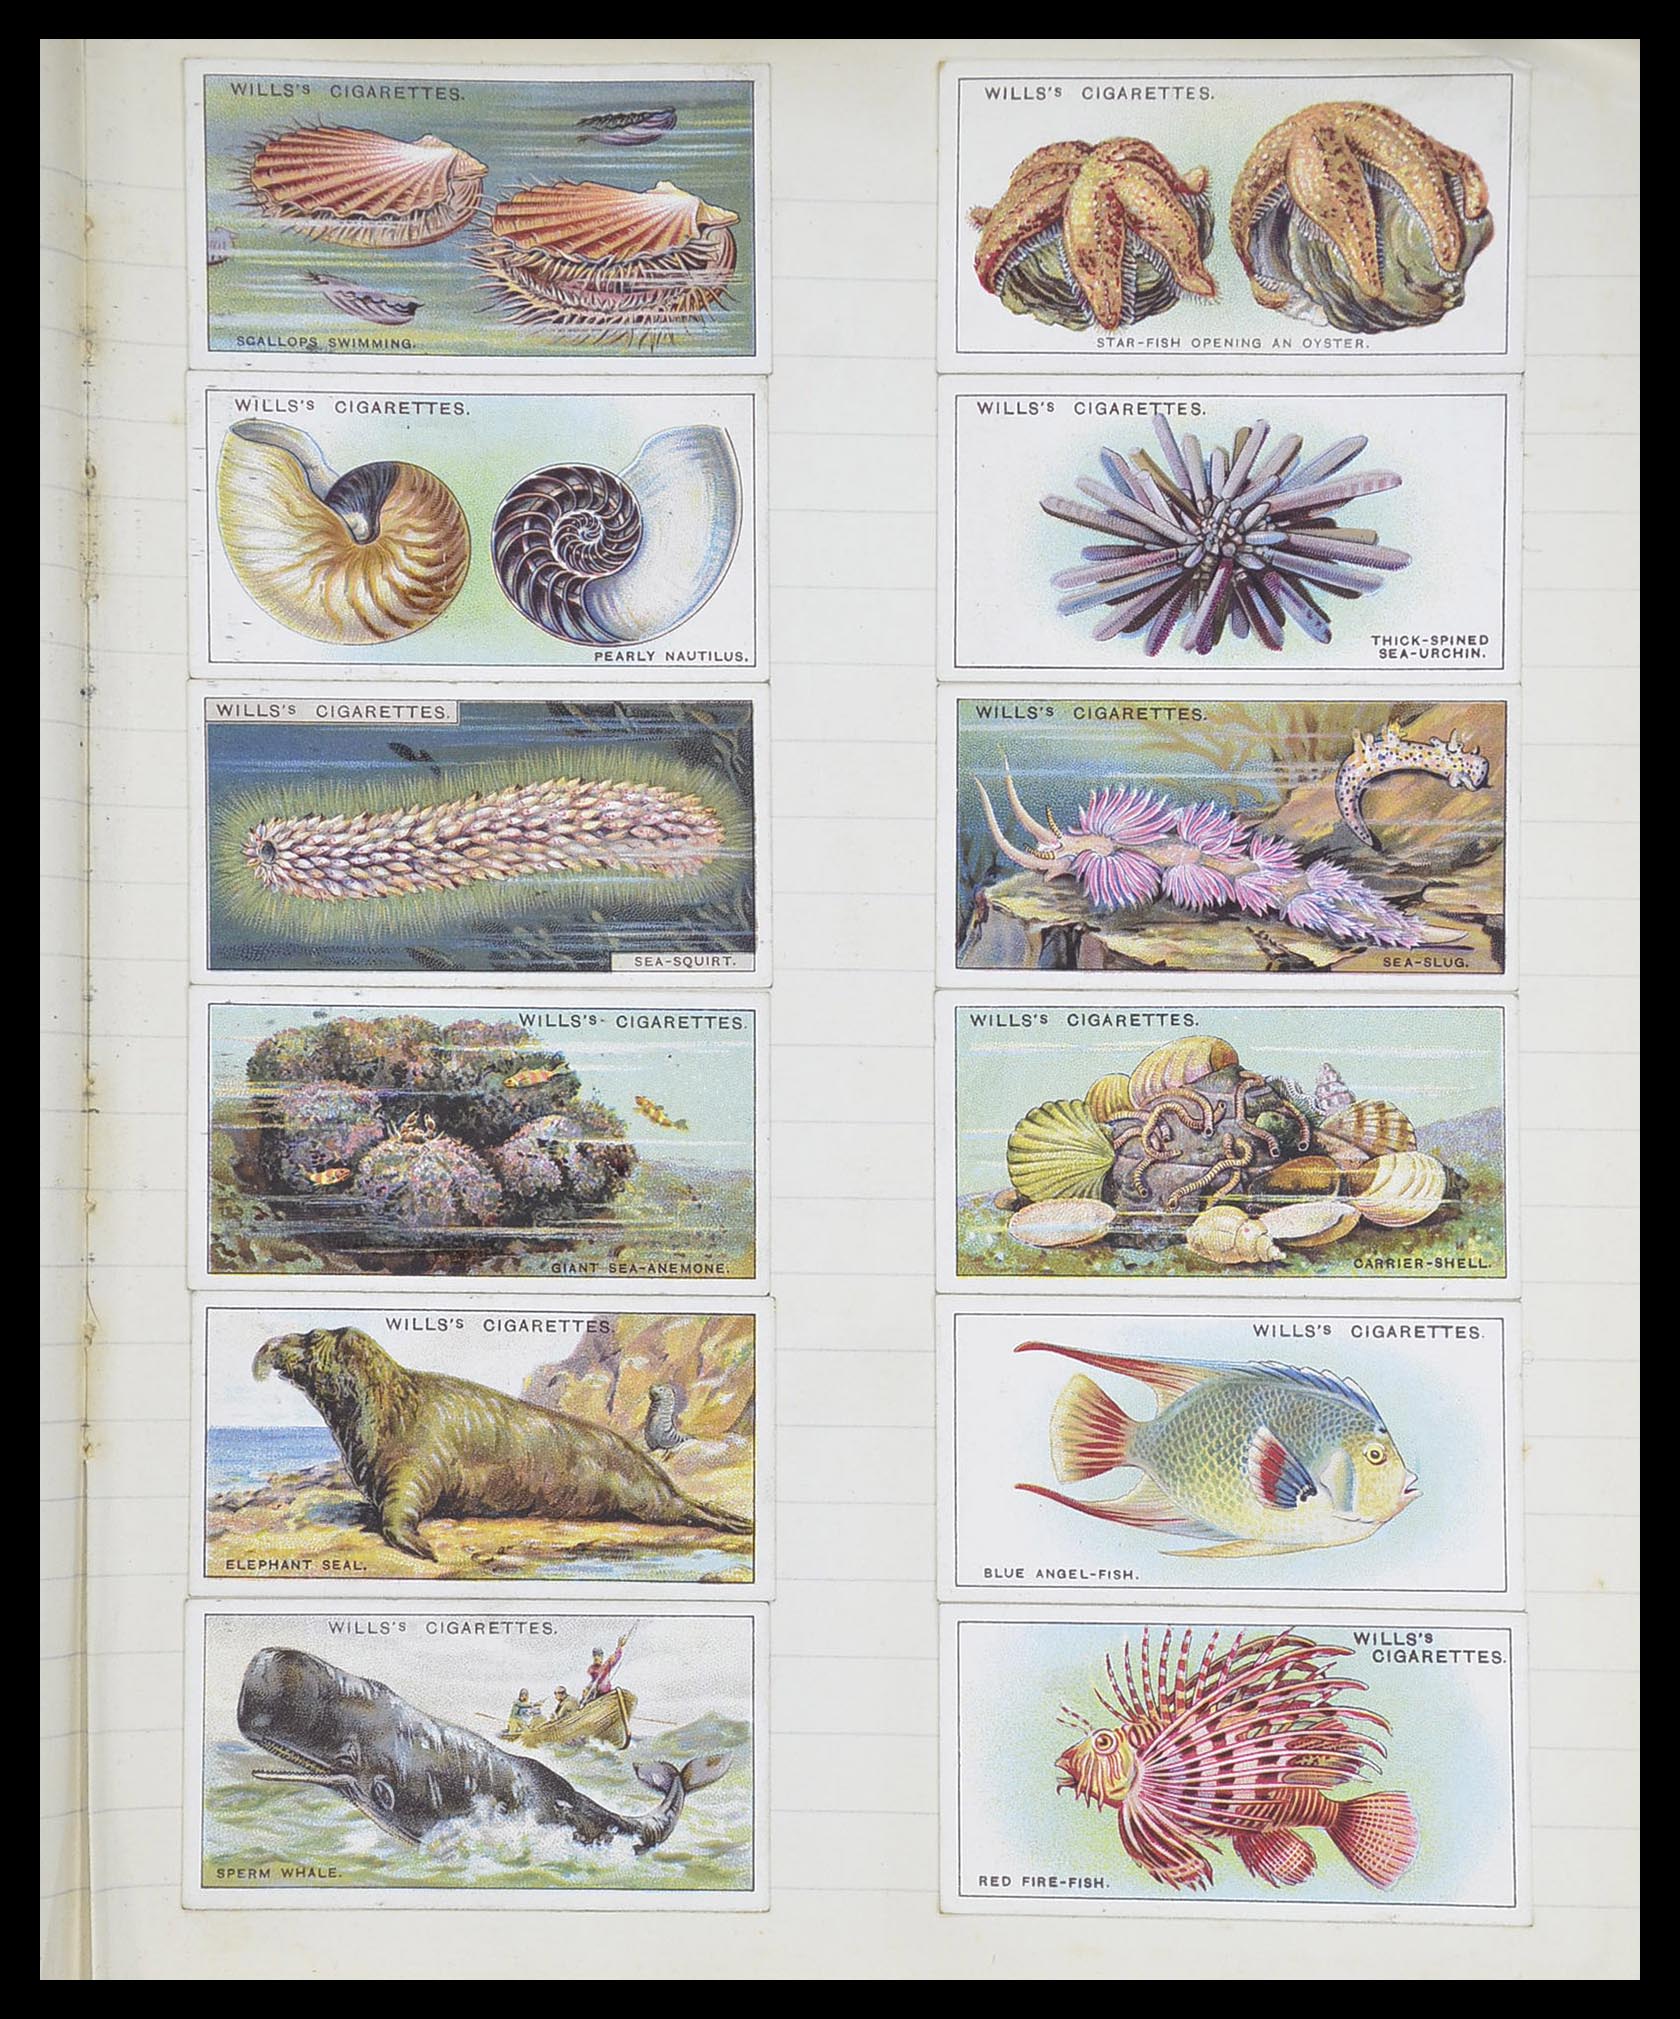 33444 093 - Stamp collection 33444 Great Britain cigarette cards.